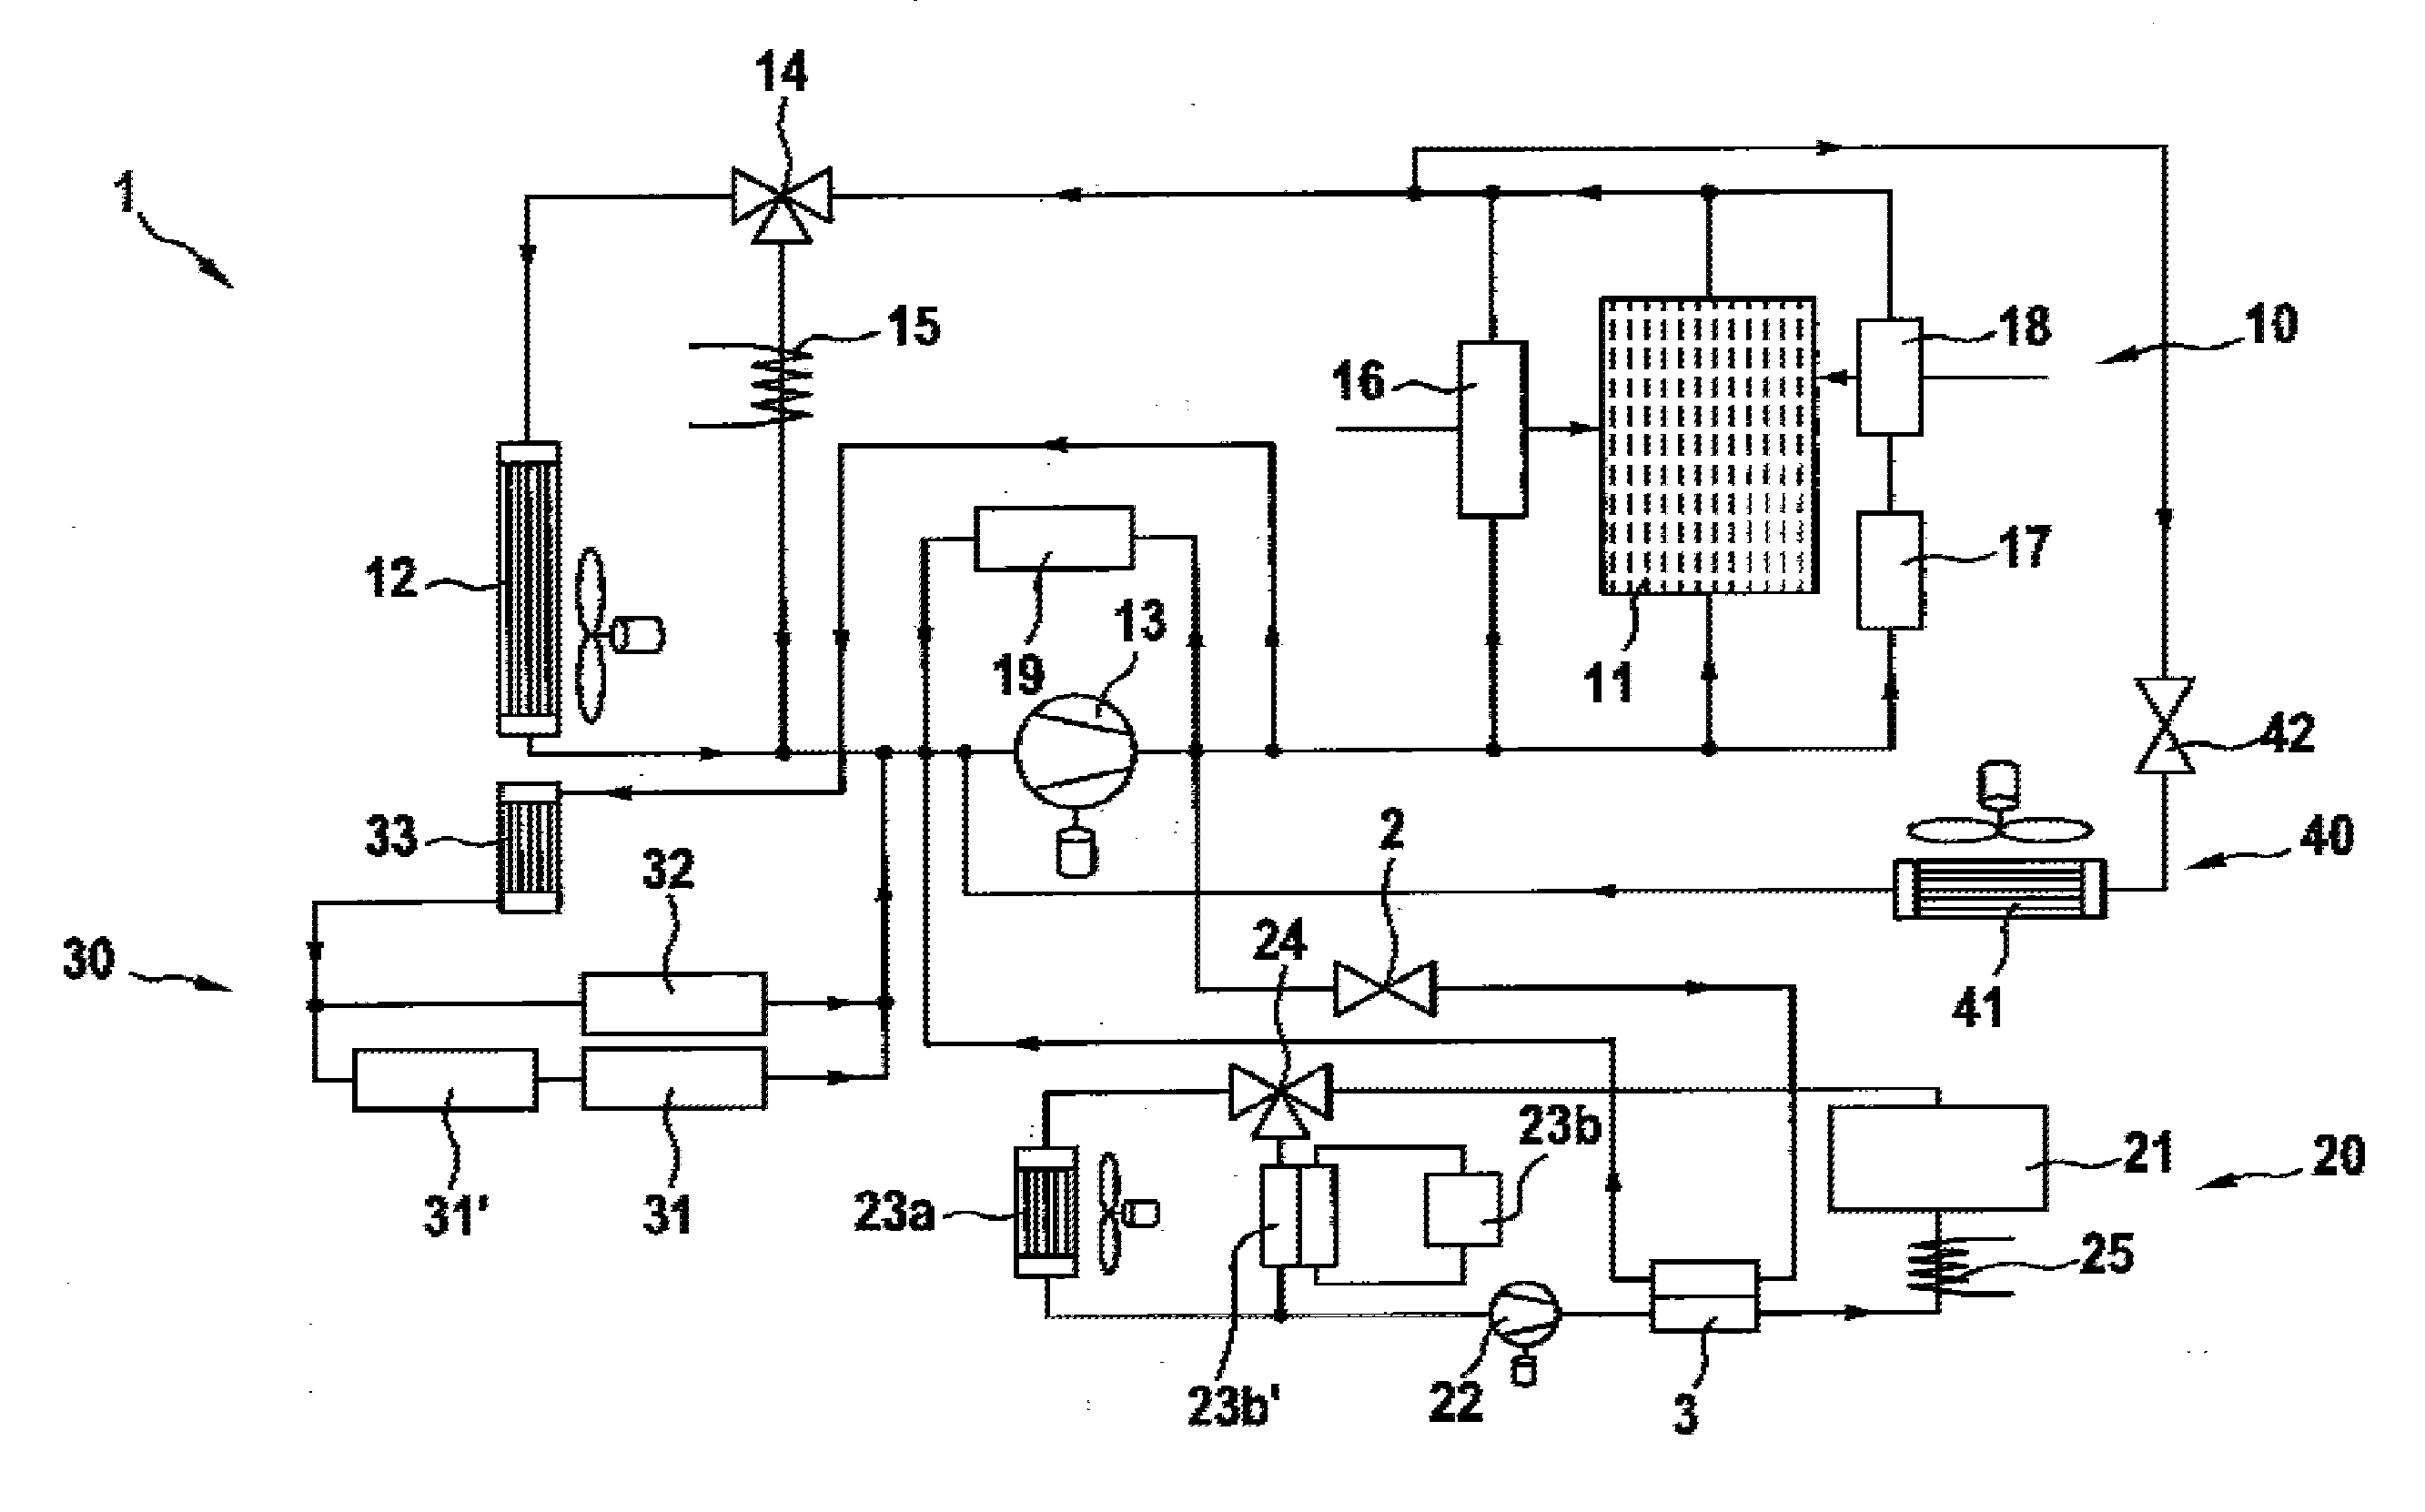 Fuel cell cooling system with coupling out of heat